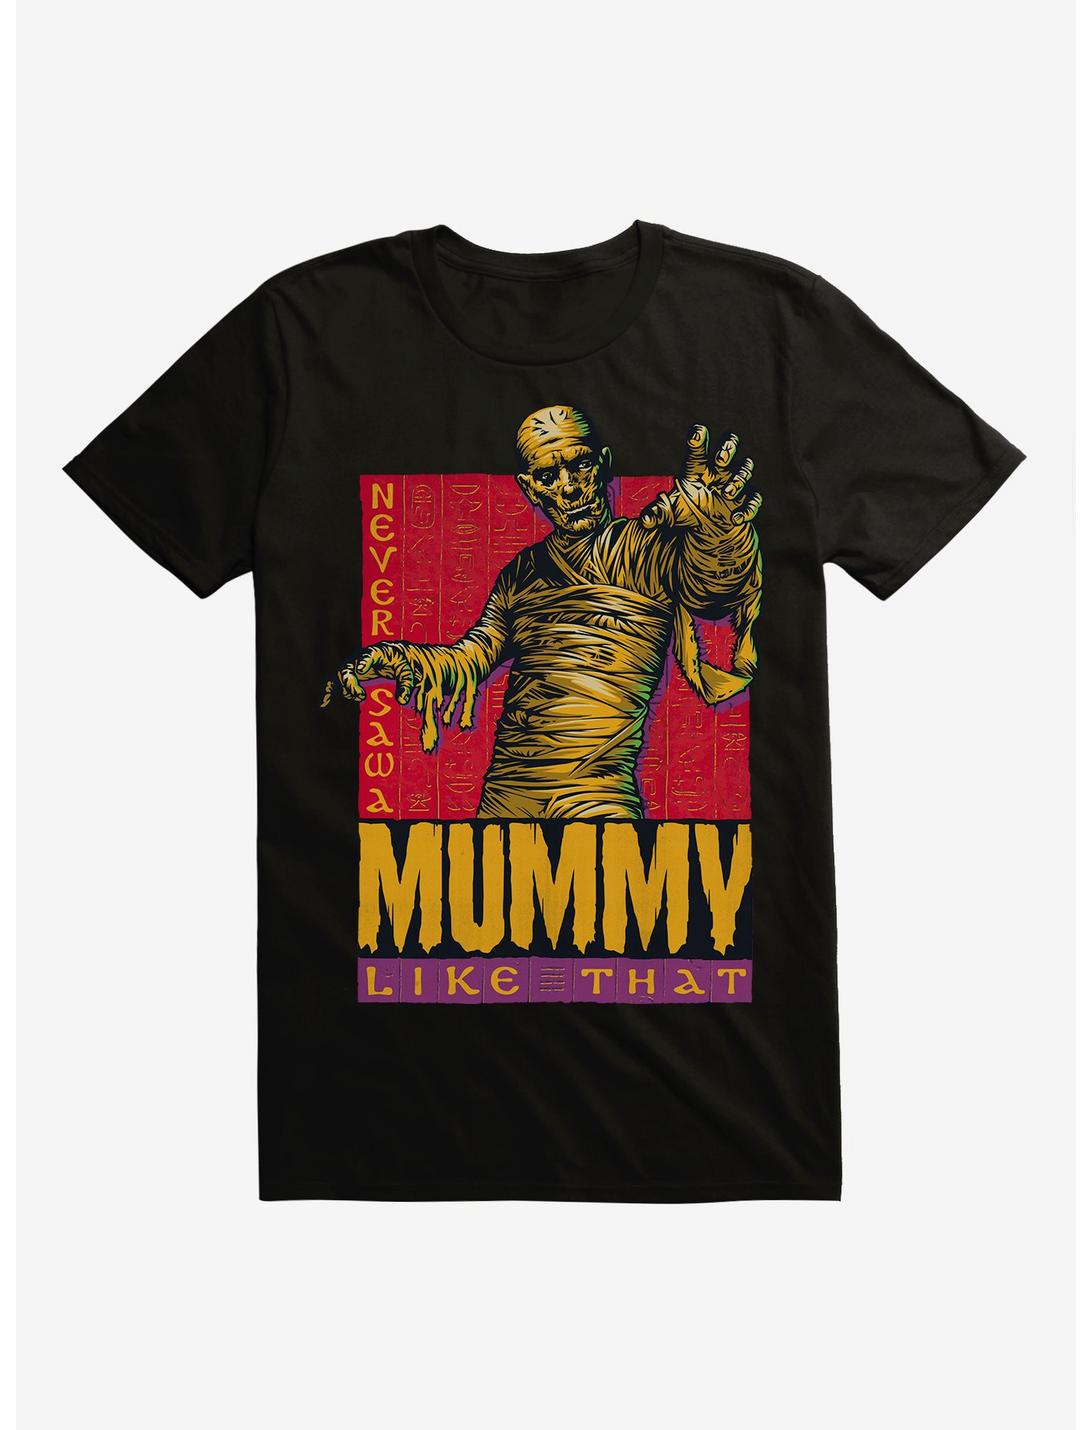 Universal Monsters Never Saw A Mummy Like That T-Shirt, BLACK, hi-res